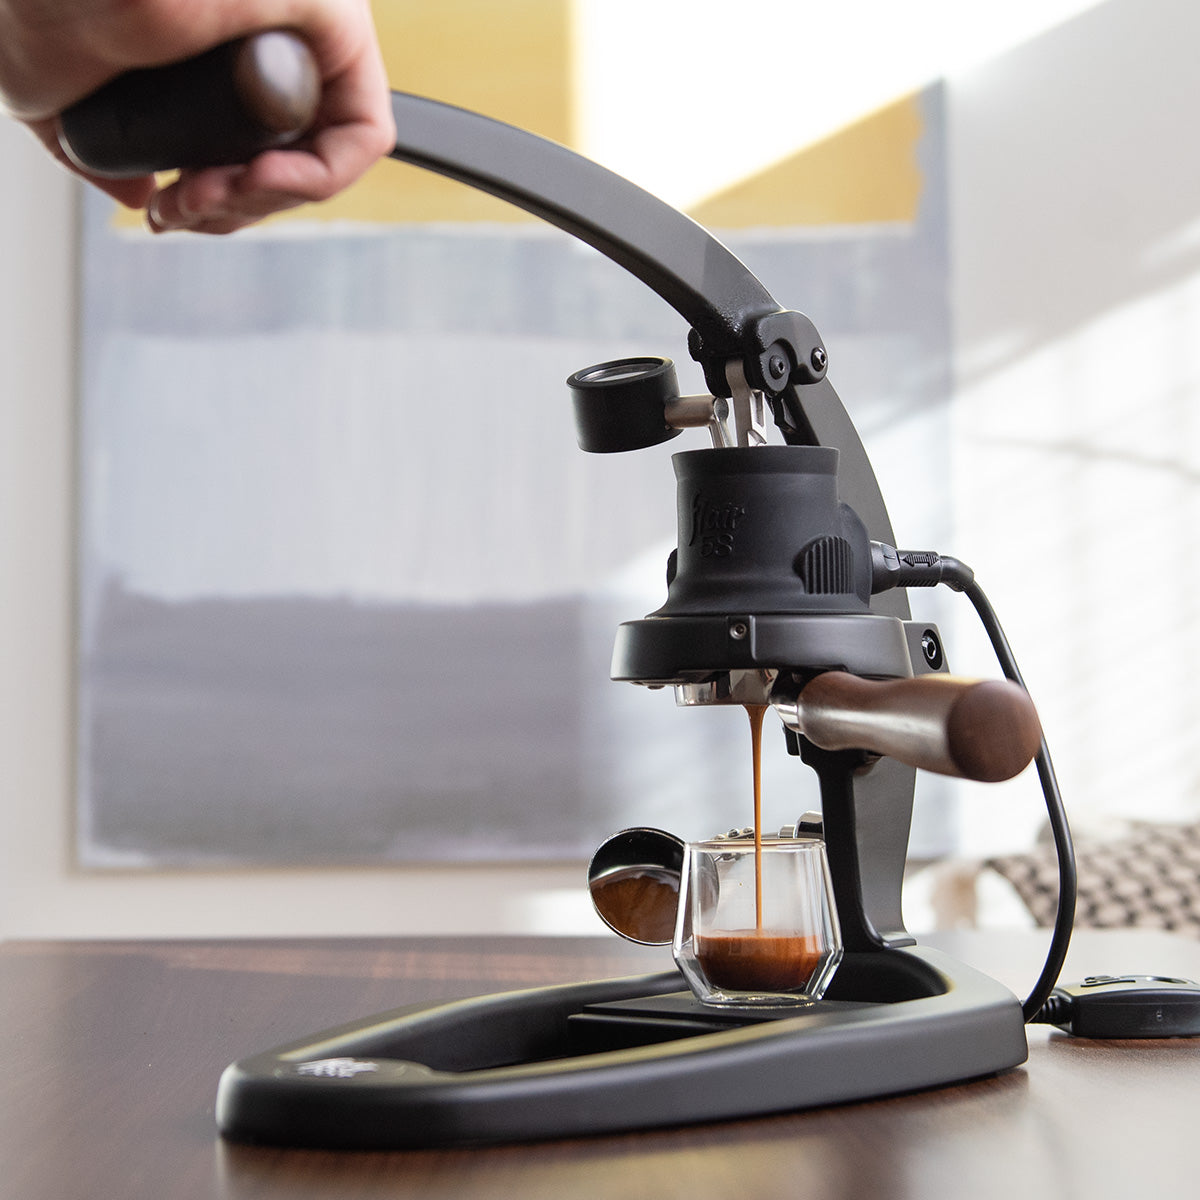 First Look Review: Flair Espresso Maker 